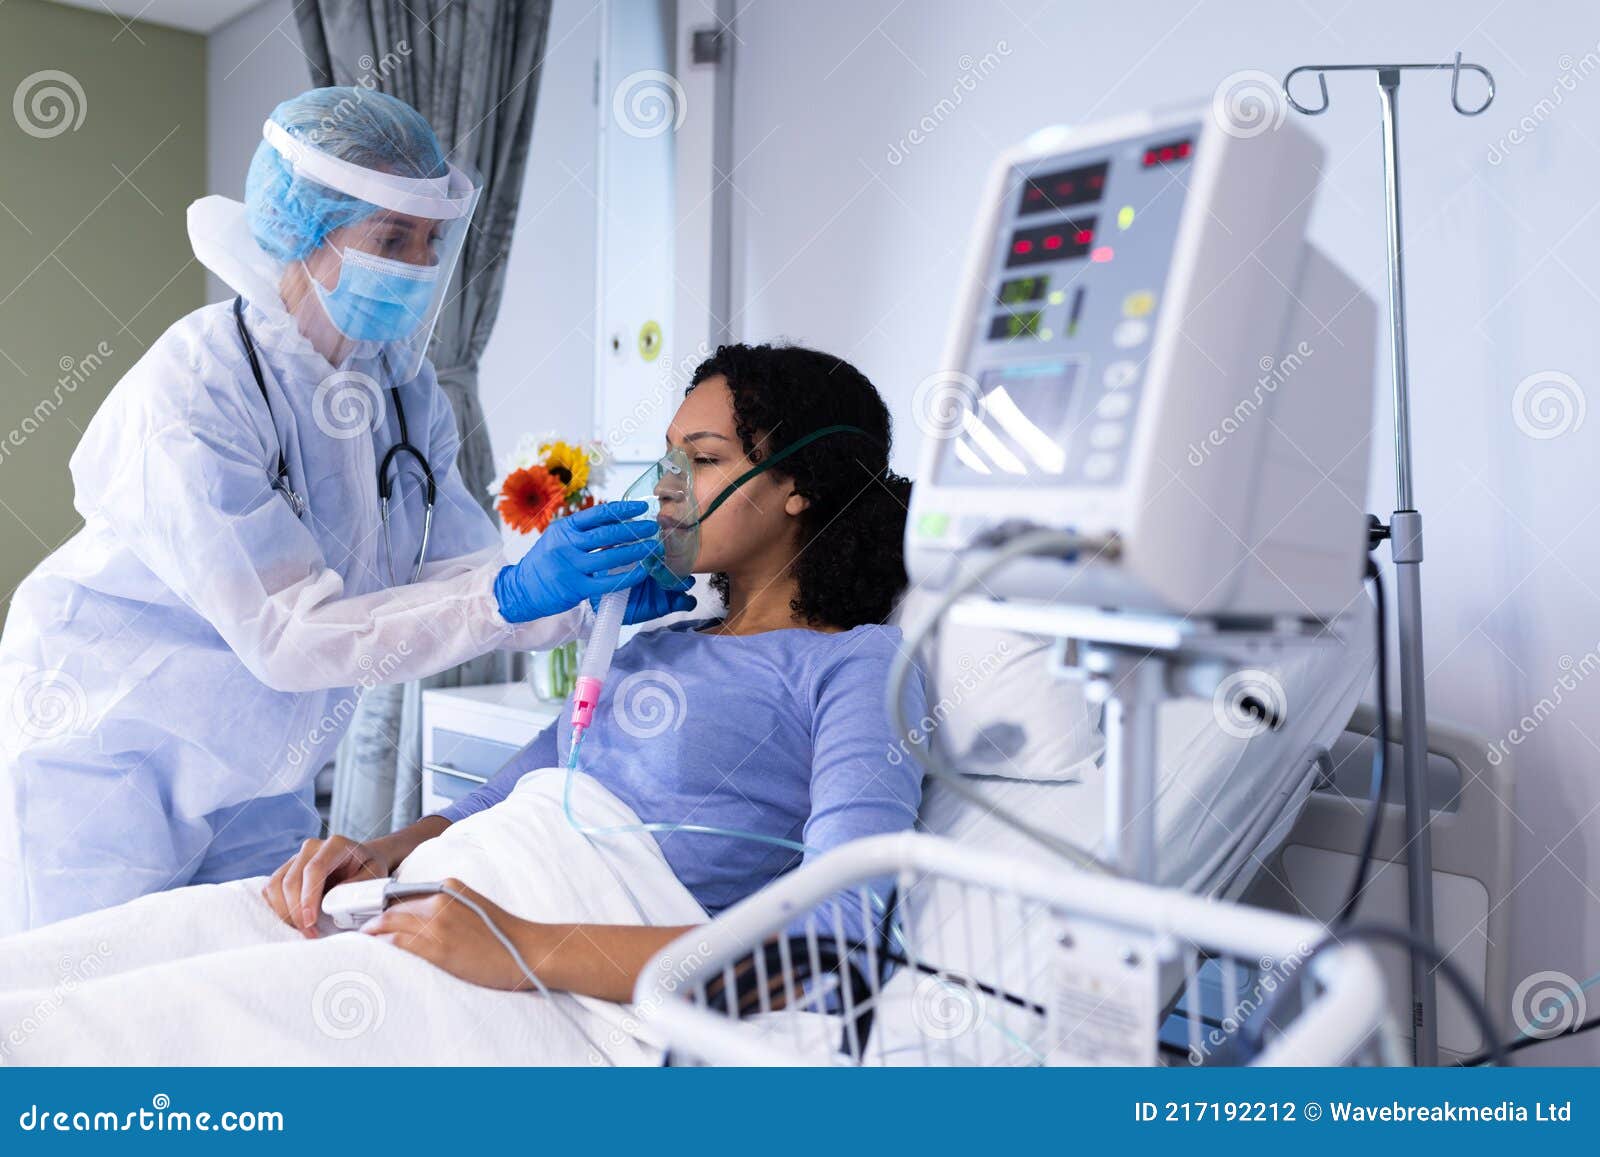 caucasian female doctor in ppe suit checking african american female patient with ventilator